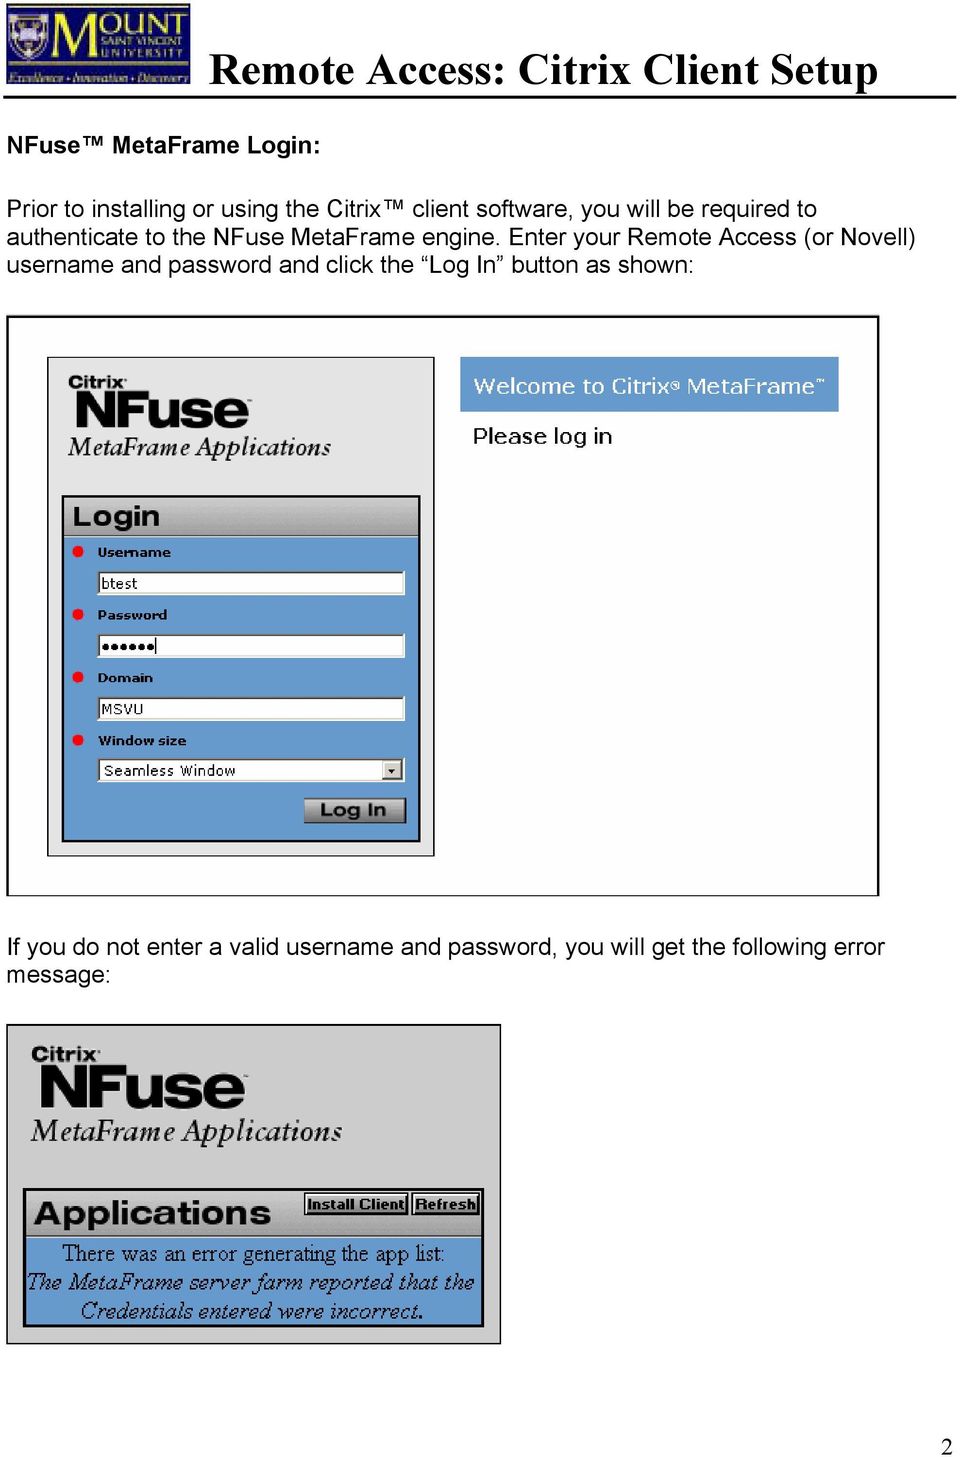 Enter your Remote Access (or Novell) username and password and click the Log In button as